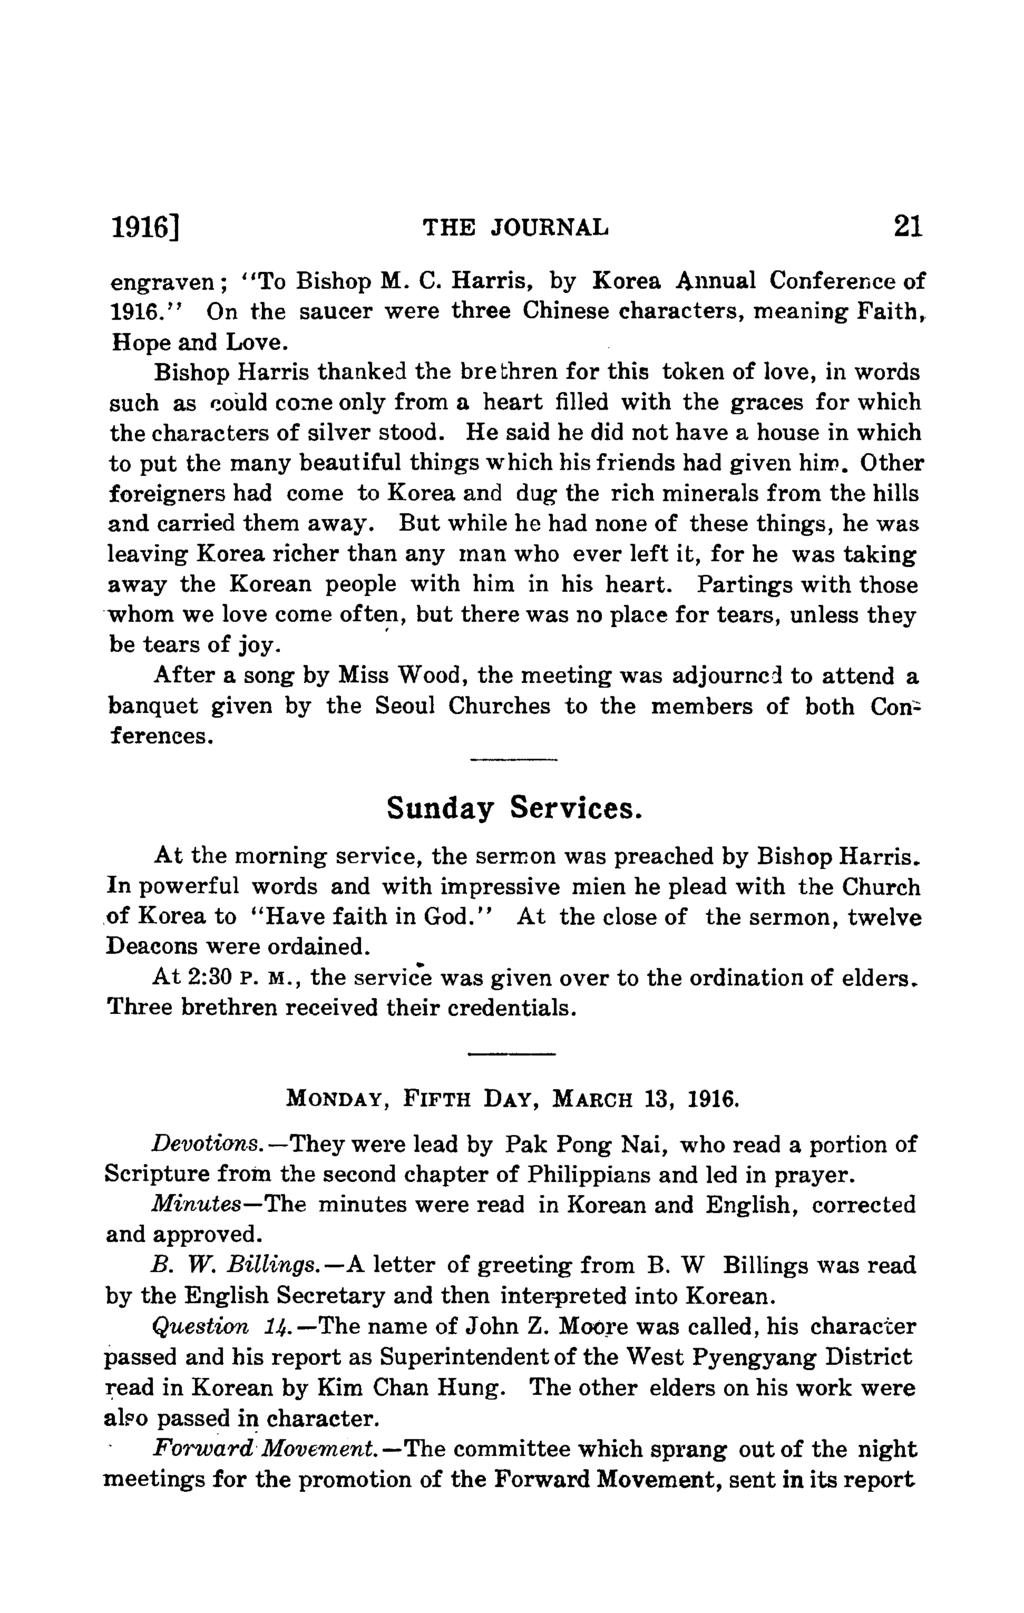 1916] THE JOURNAL 21 engraven; lito Bishop M. C. Harris, by Korea Annual Conference of 1916." On the saucer were three Chinese characters, meaning Faith, Hope and Love.